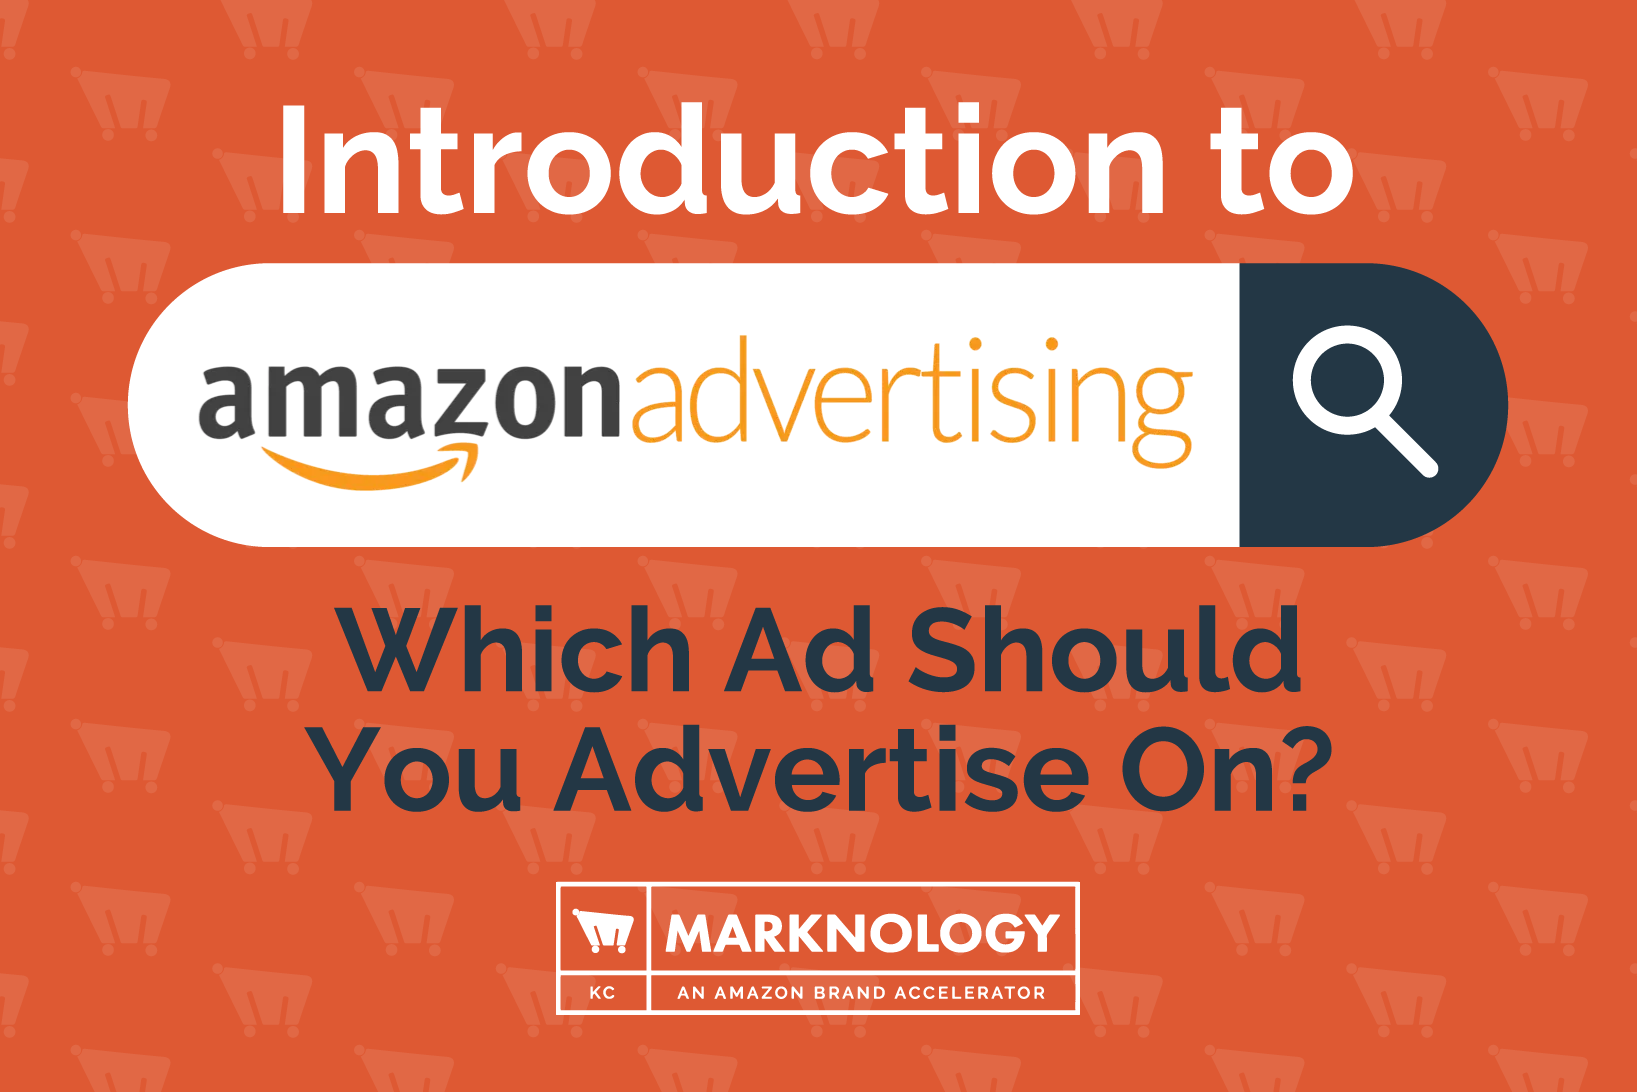 Introduction to Amazon Advertising - Which Ad Should You Advertise On?